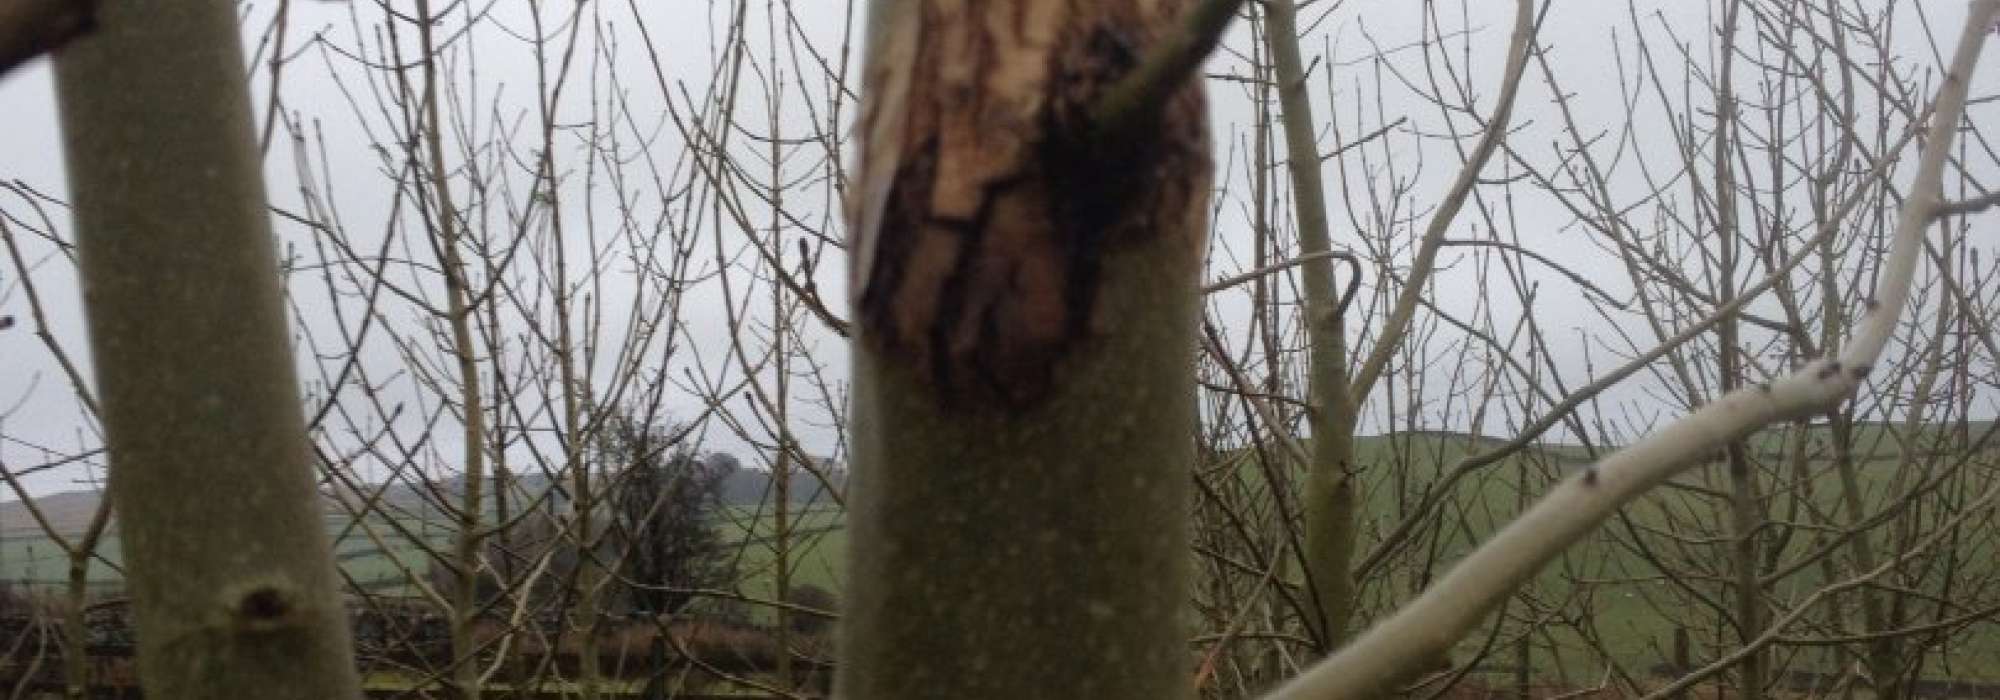 The effects of Ash Dieback on trees. 